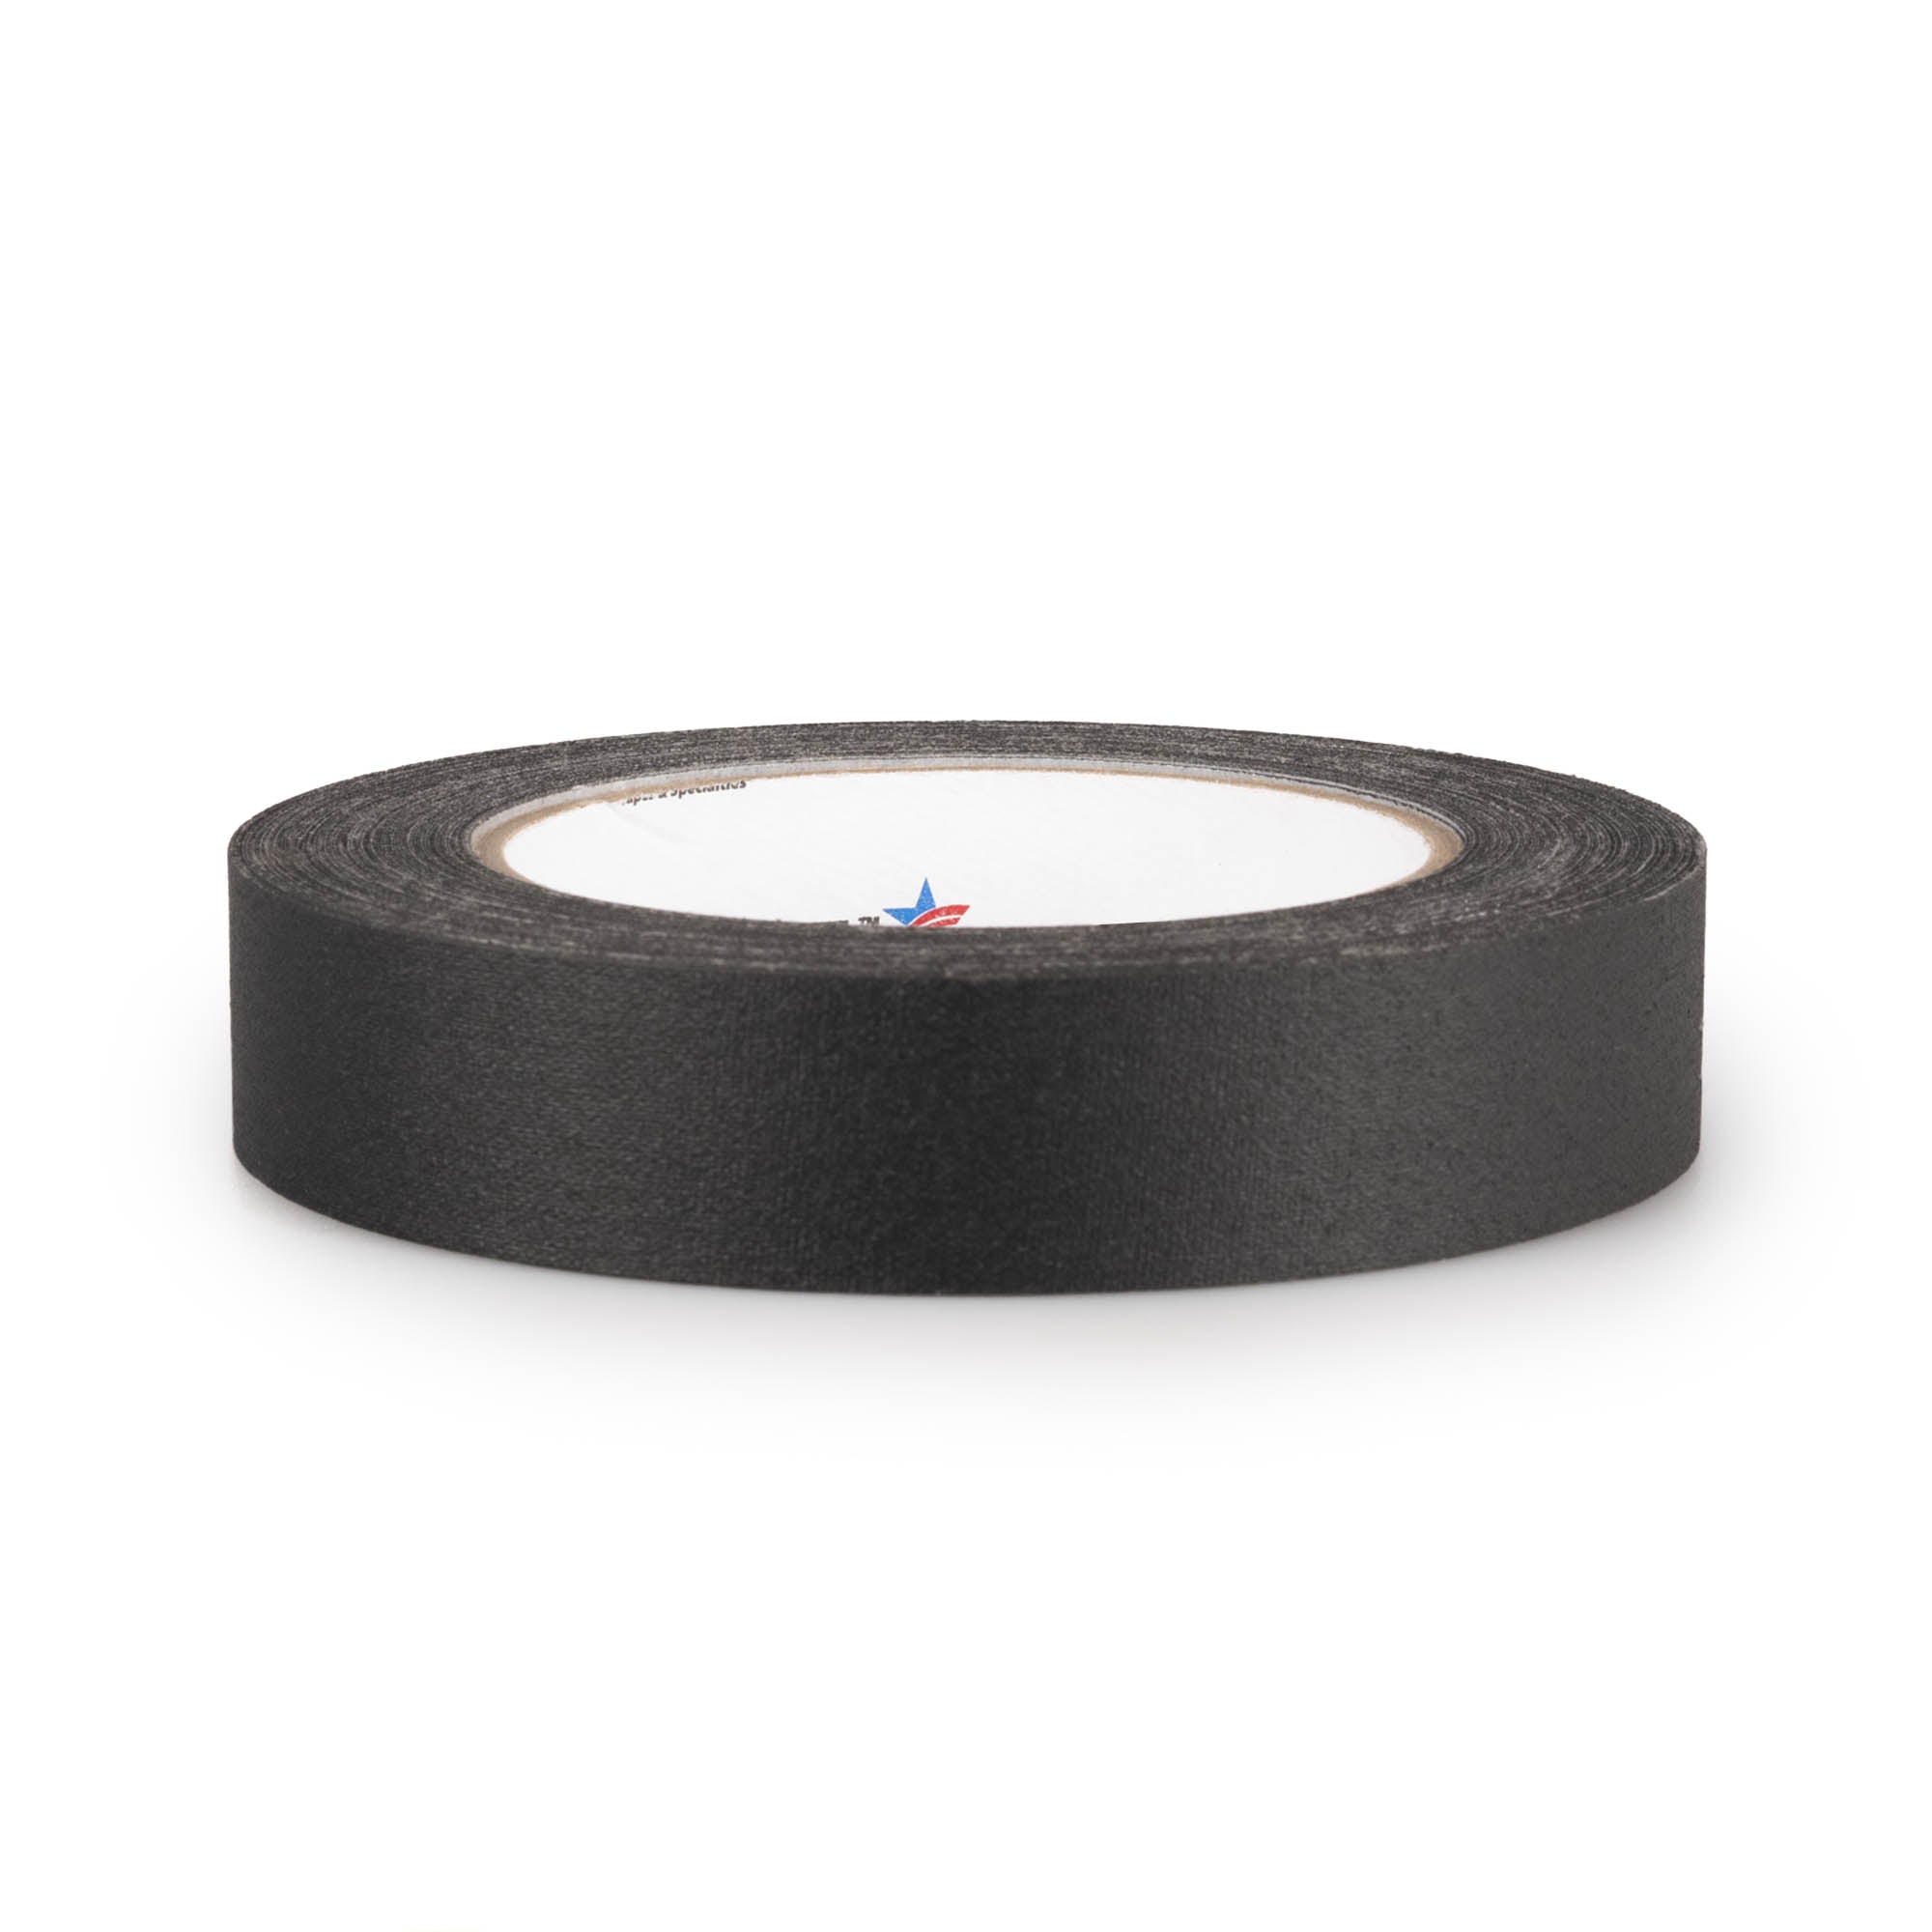 25m roll of pro gaff fabric adhesive tape in black laying in a white background